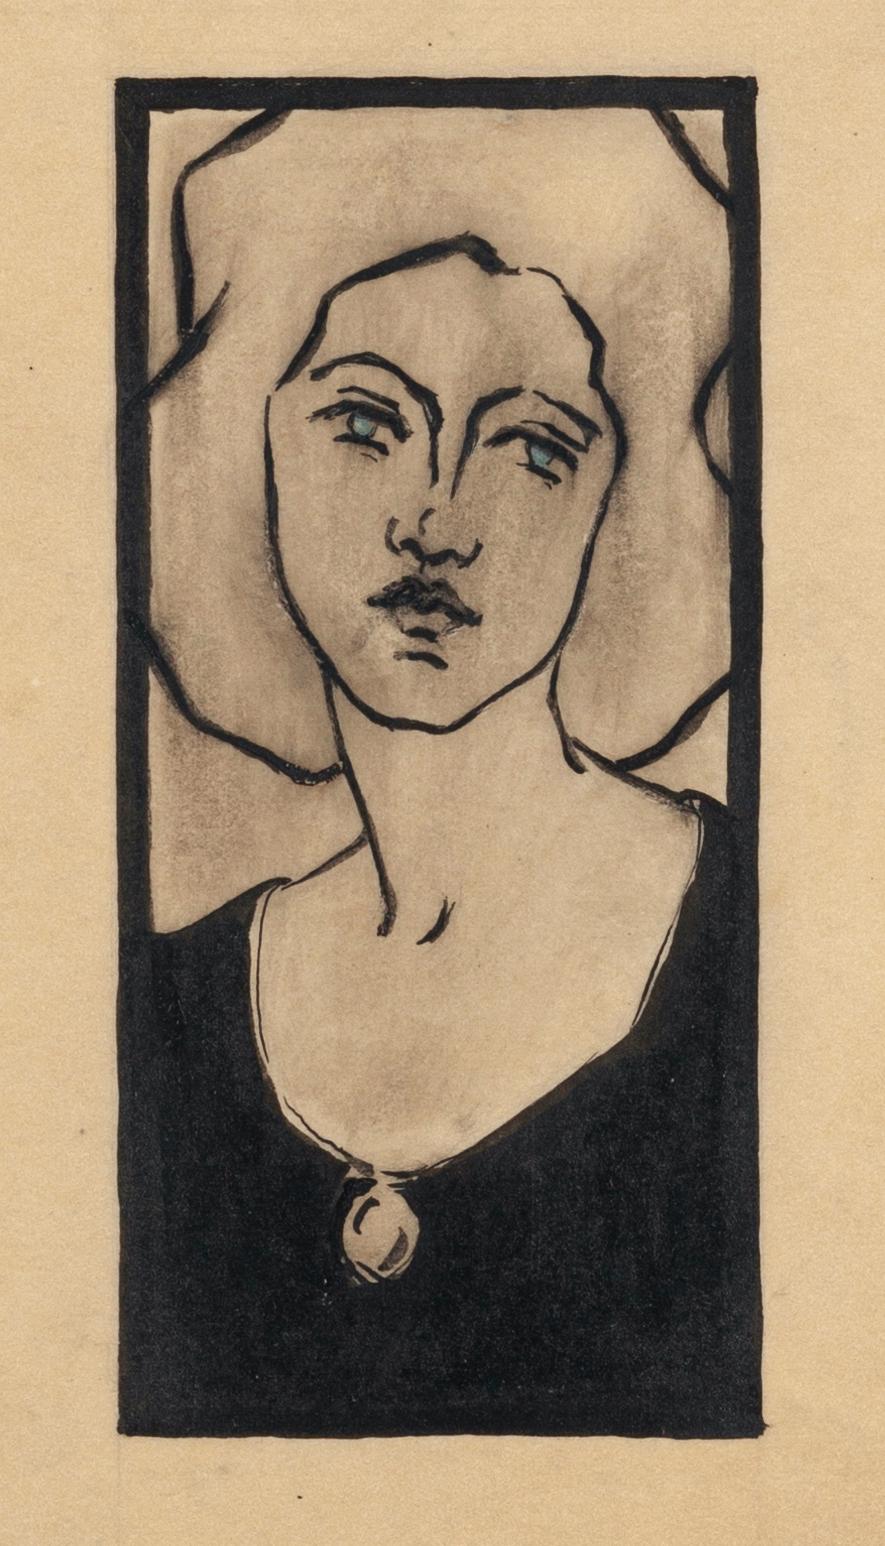 Woman is original drawings in mixed media on paper, realized by Angelo Griscelli (1893-1978).

The state of preservation of the artwork is very good.

The artwork represents a woman with a sense of sadness and innocence in her look. The simplicity